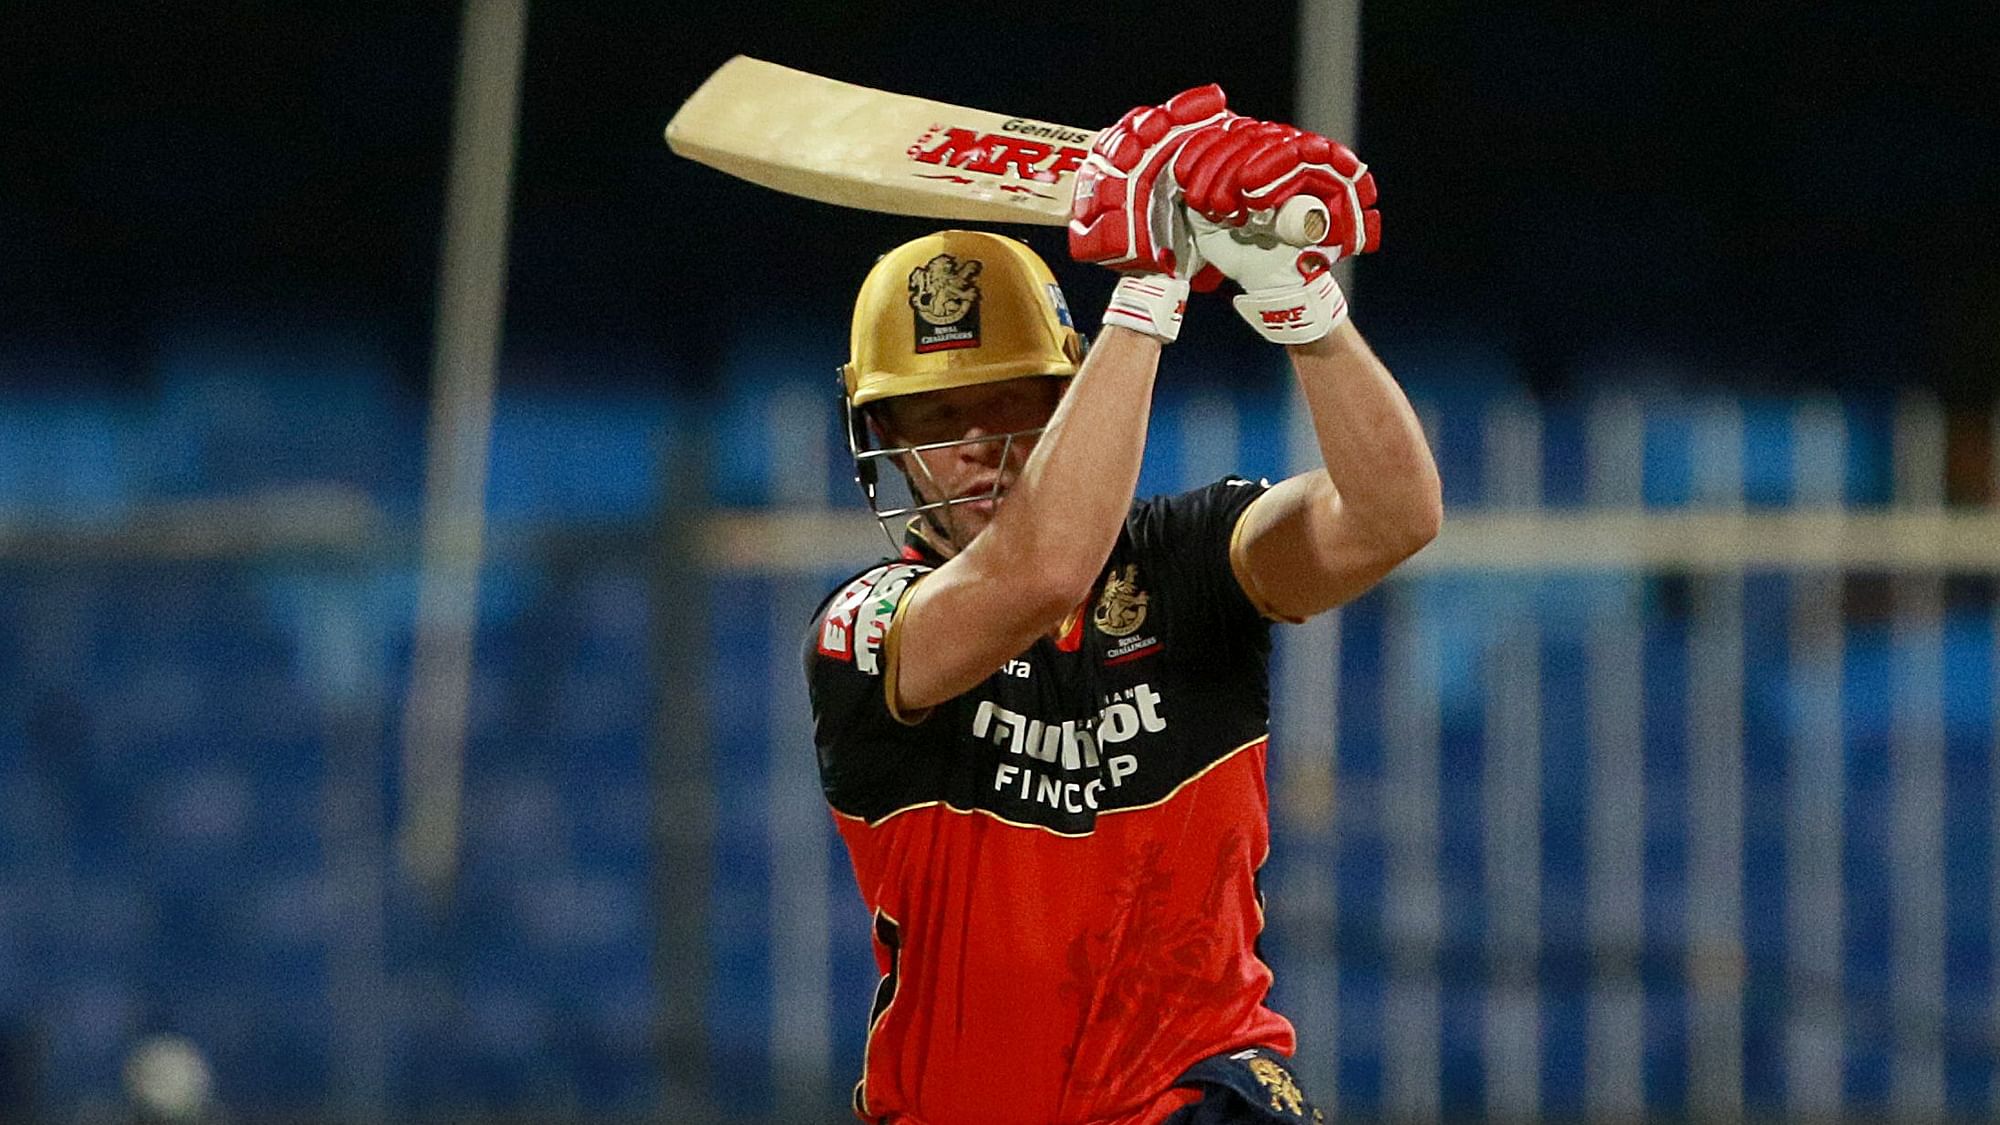 <div class="paragraphs"><p>Ab de Villiers scored a century in an inter-squad practise game for RCB.</p></div>